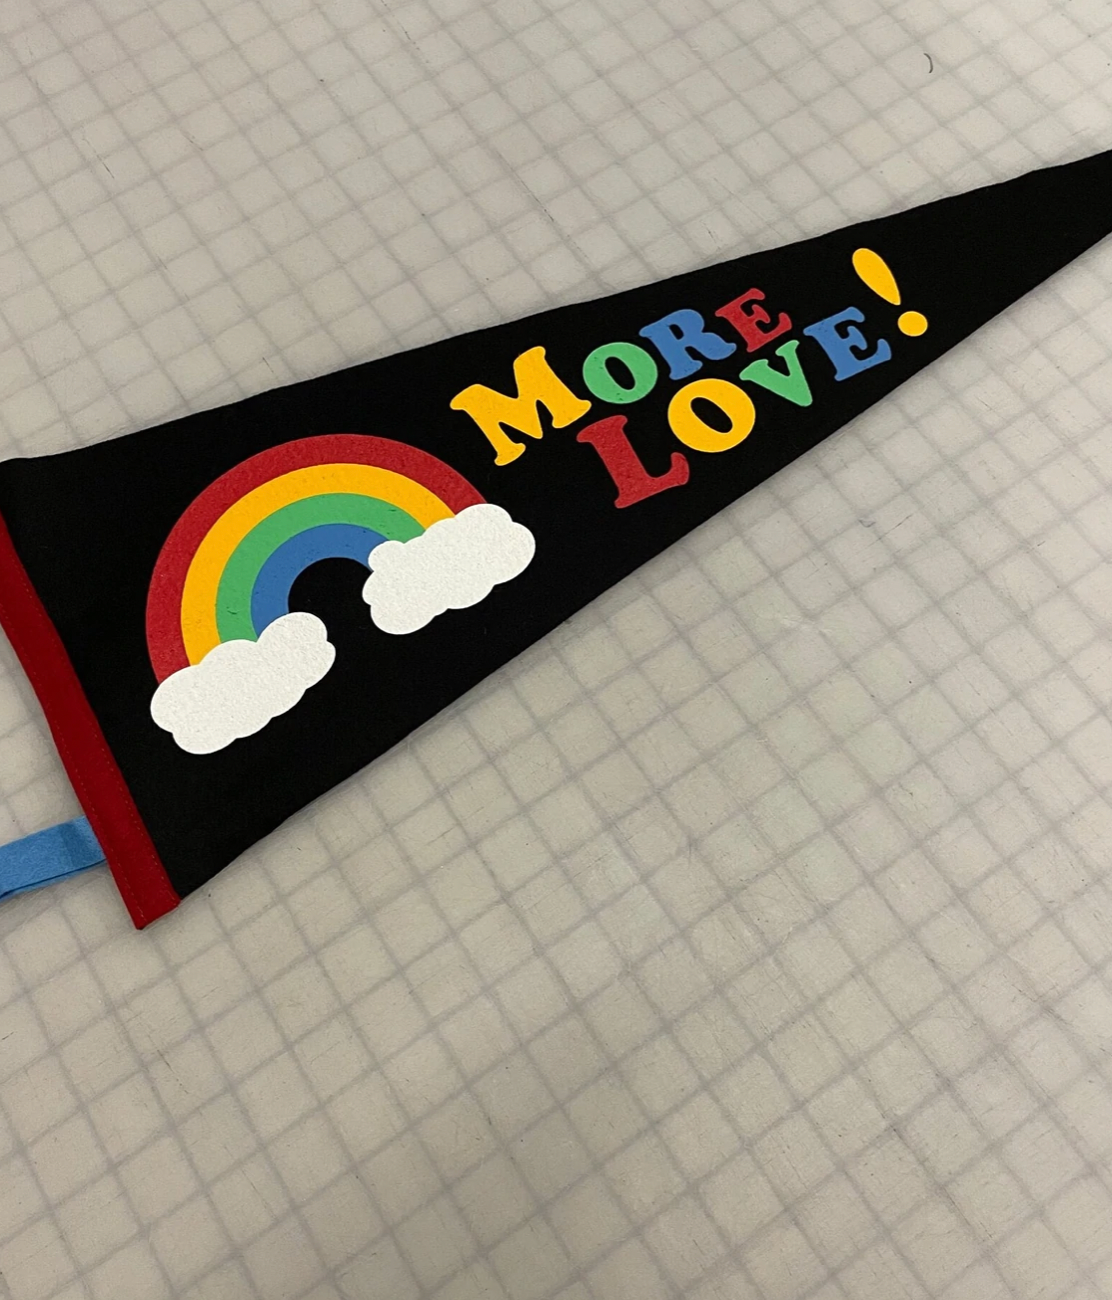 Black pennant flag with a rainbow that says "More Love!" in rainbow letters.